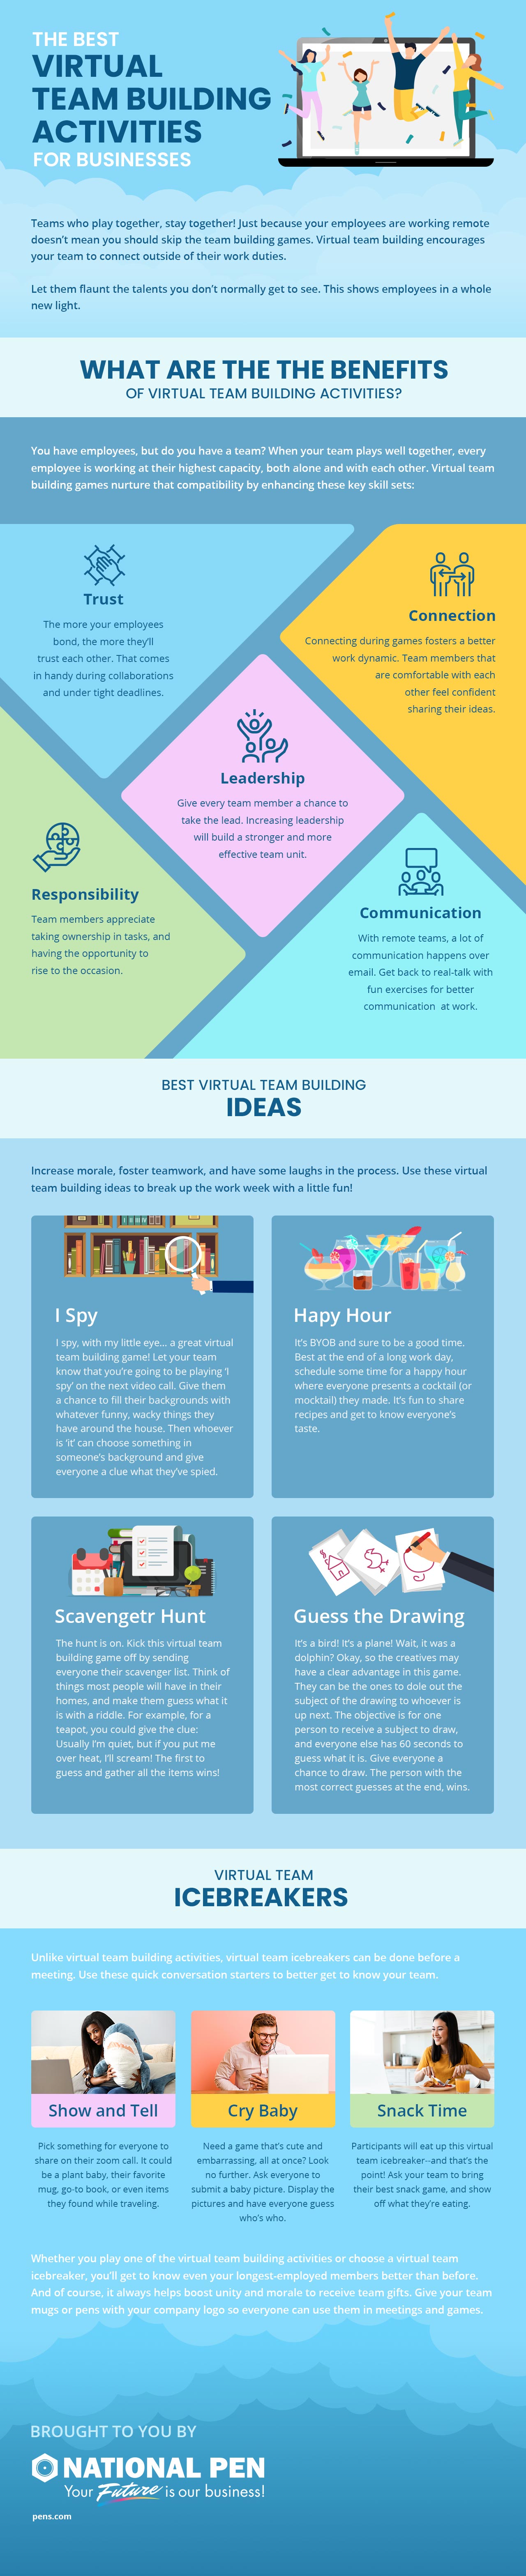 How to Build the Best Team, Best Story Party